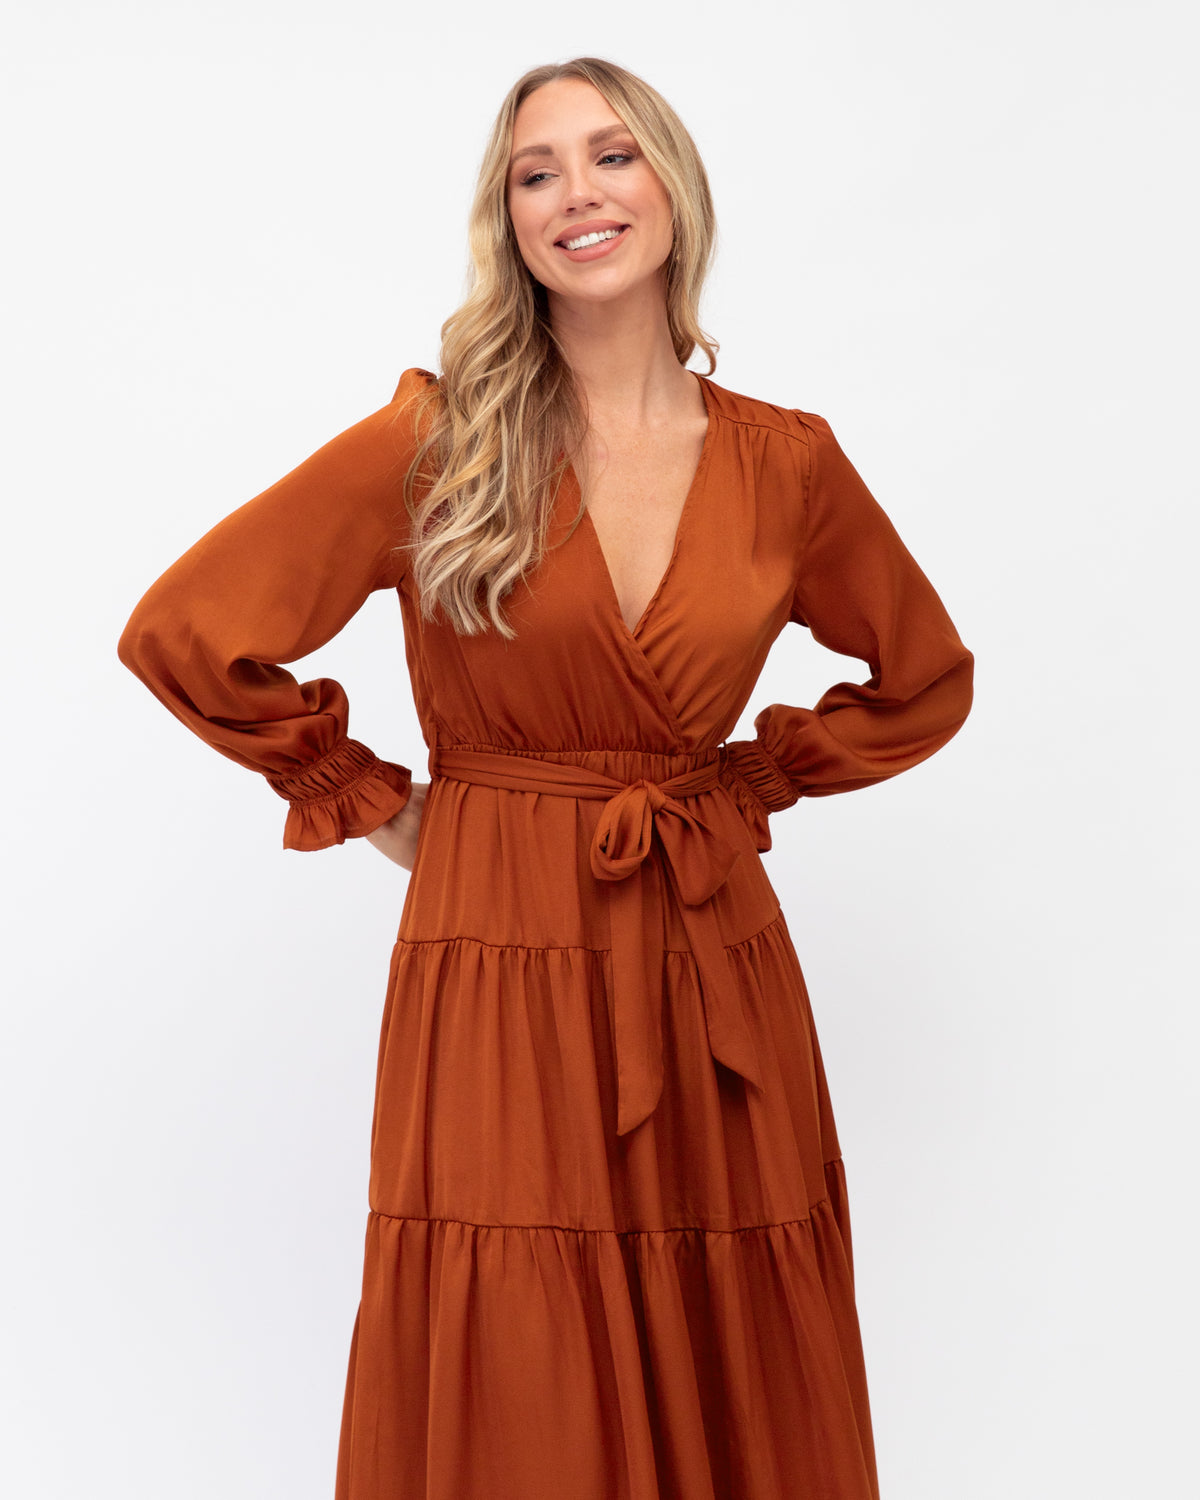 A model wearing a tan tie waist maxi dress that has elasticated cuffs with frill detail and a tiered skirt from the Ebby and I collection designed by Global Fashion House. 